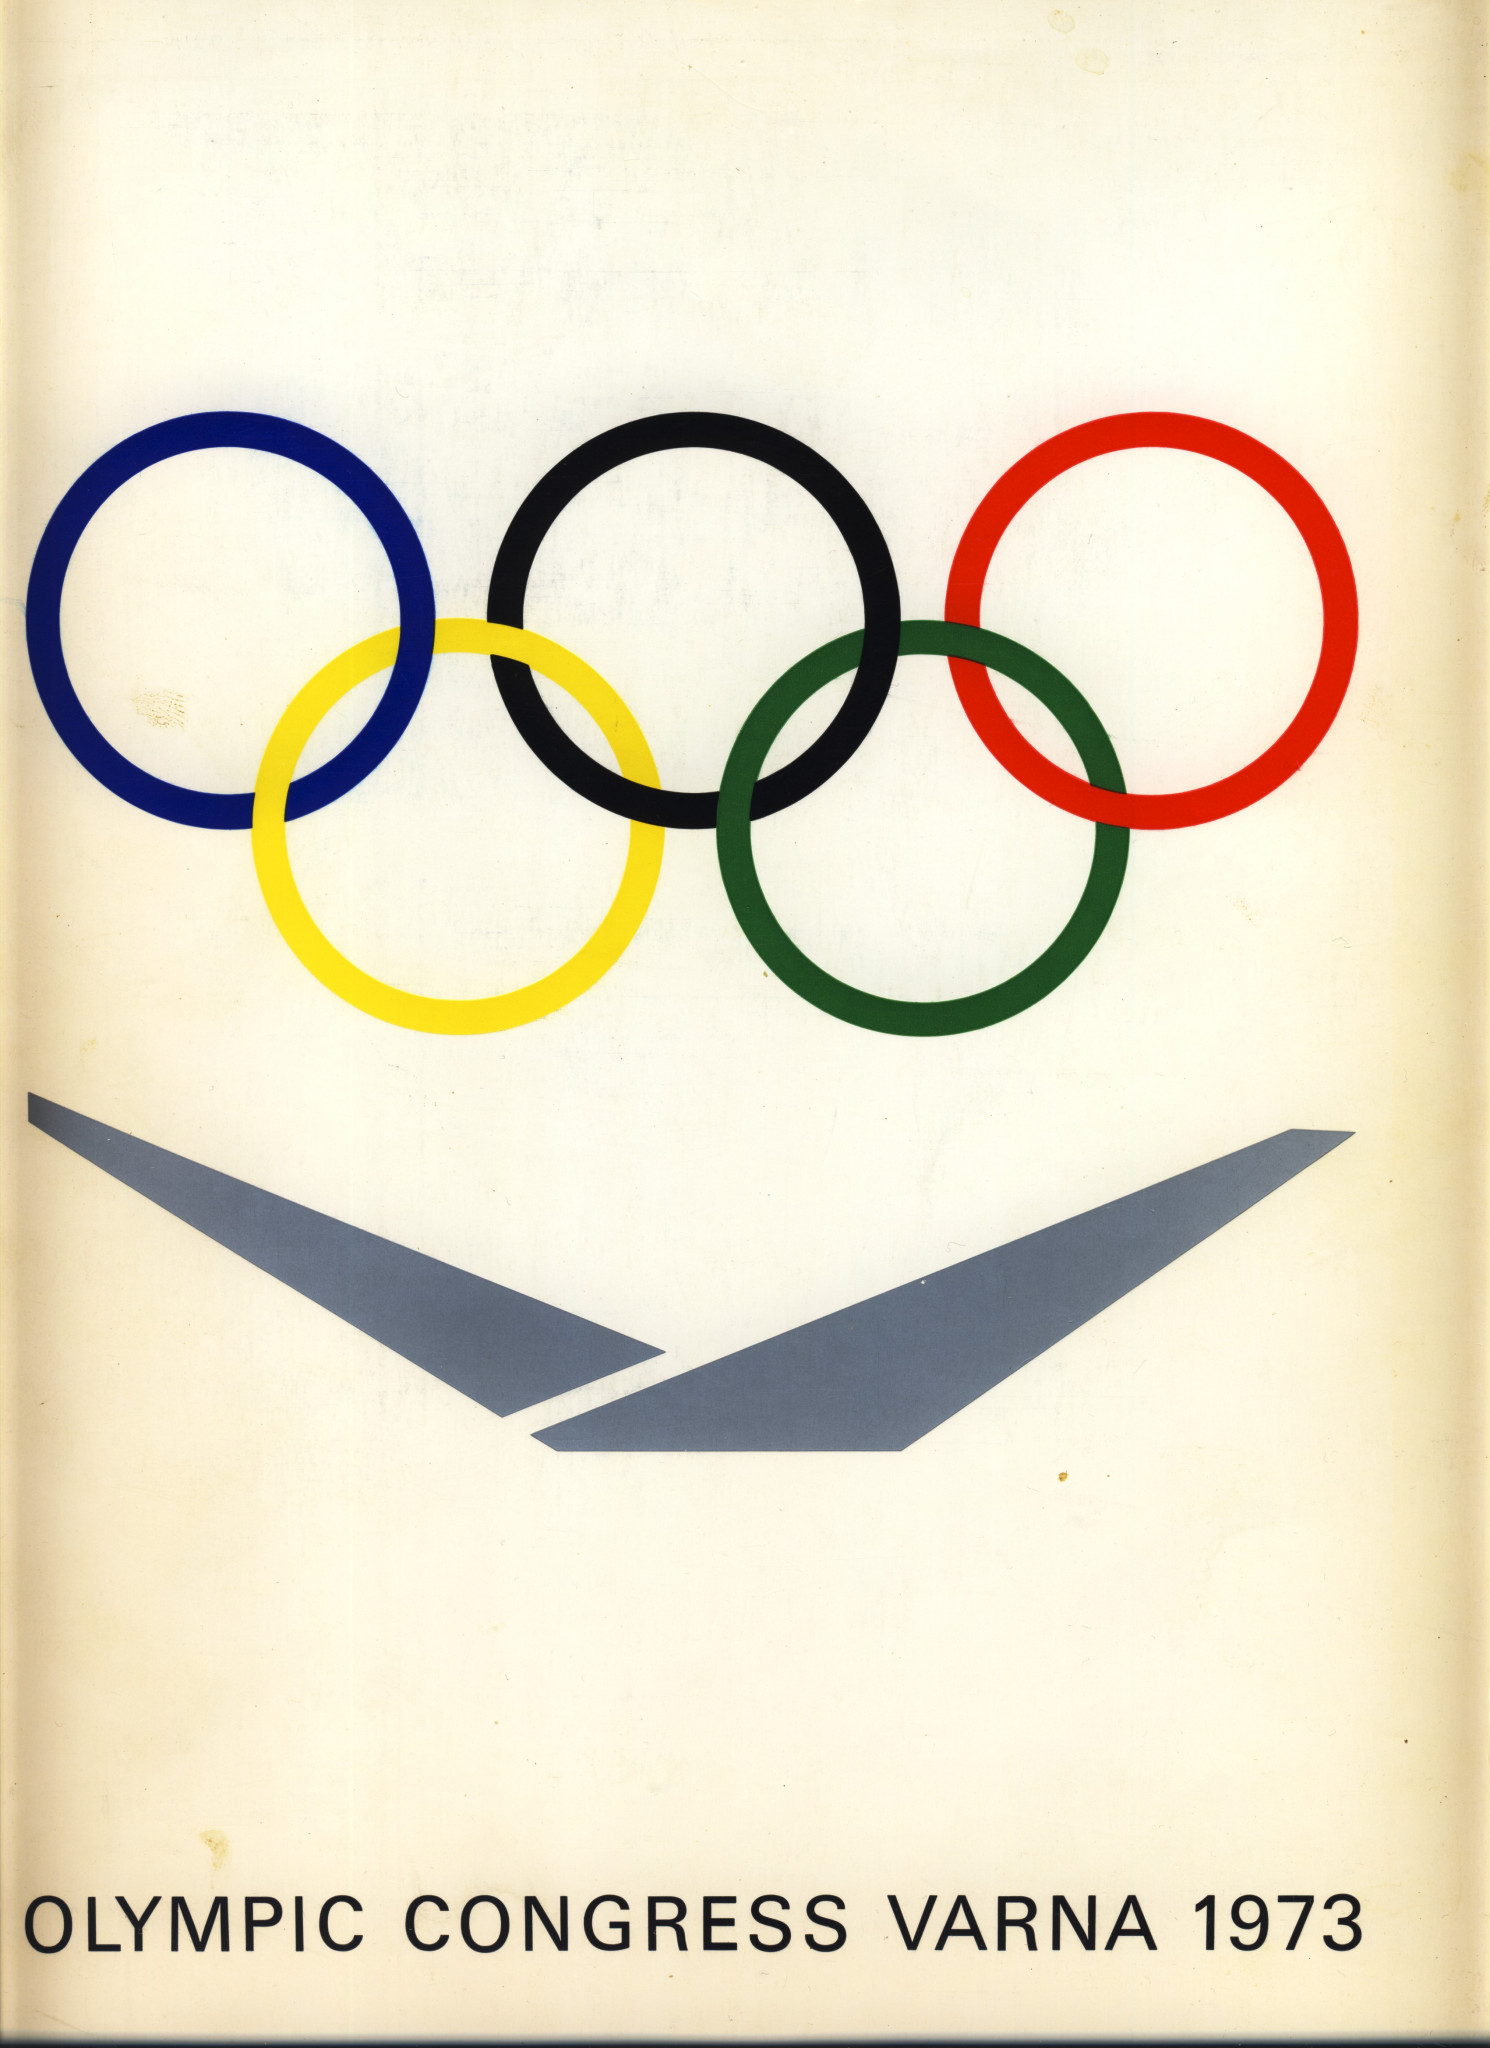 The Official Report of the Olympic Congress in Varna ©Varna 1973